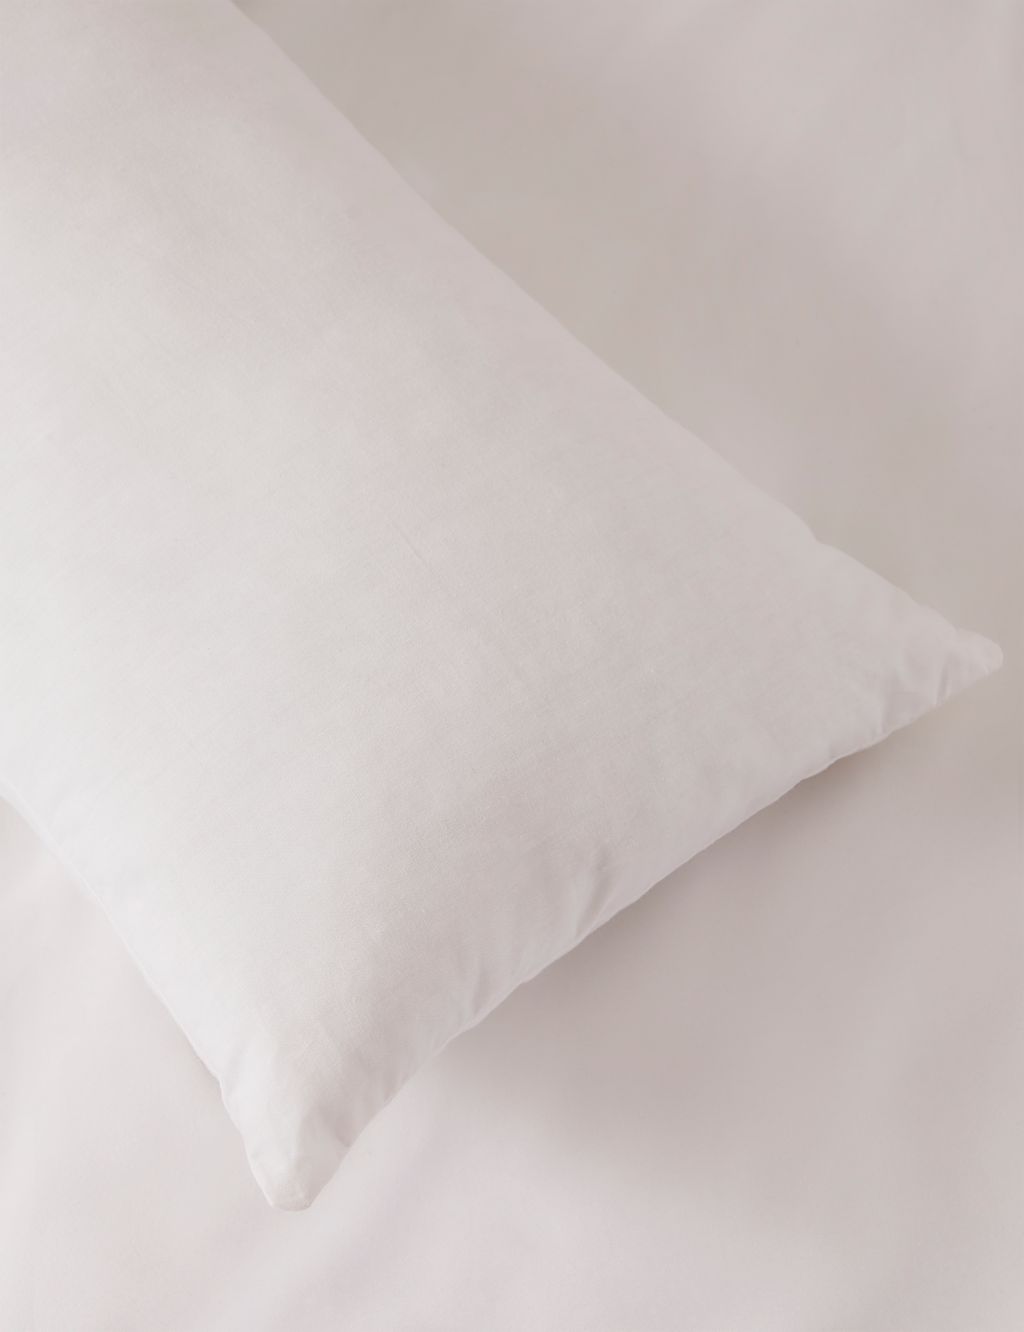 Sleep Solutions Medium V-Shaped Pillow with Pillowcase image 2